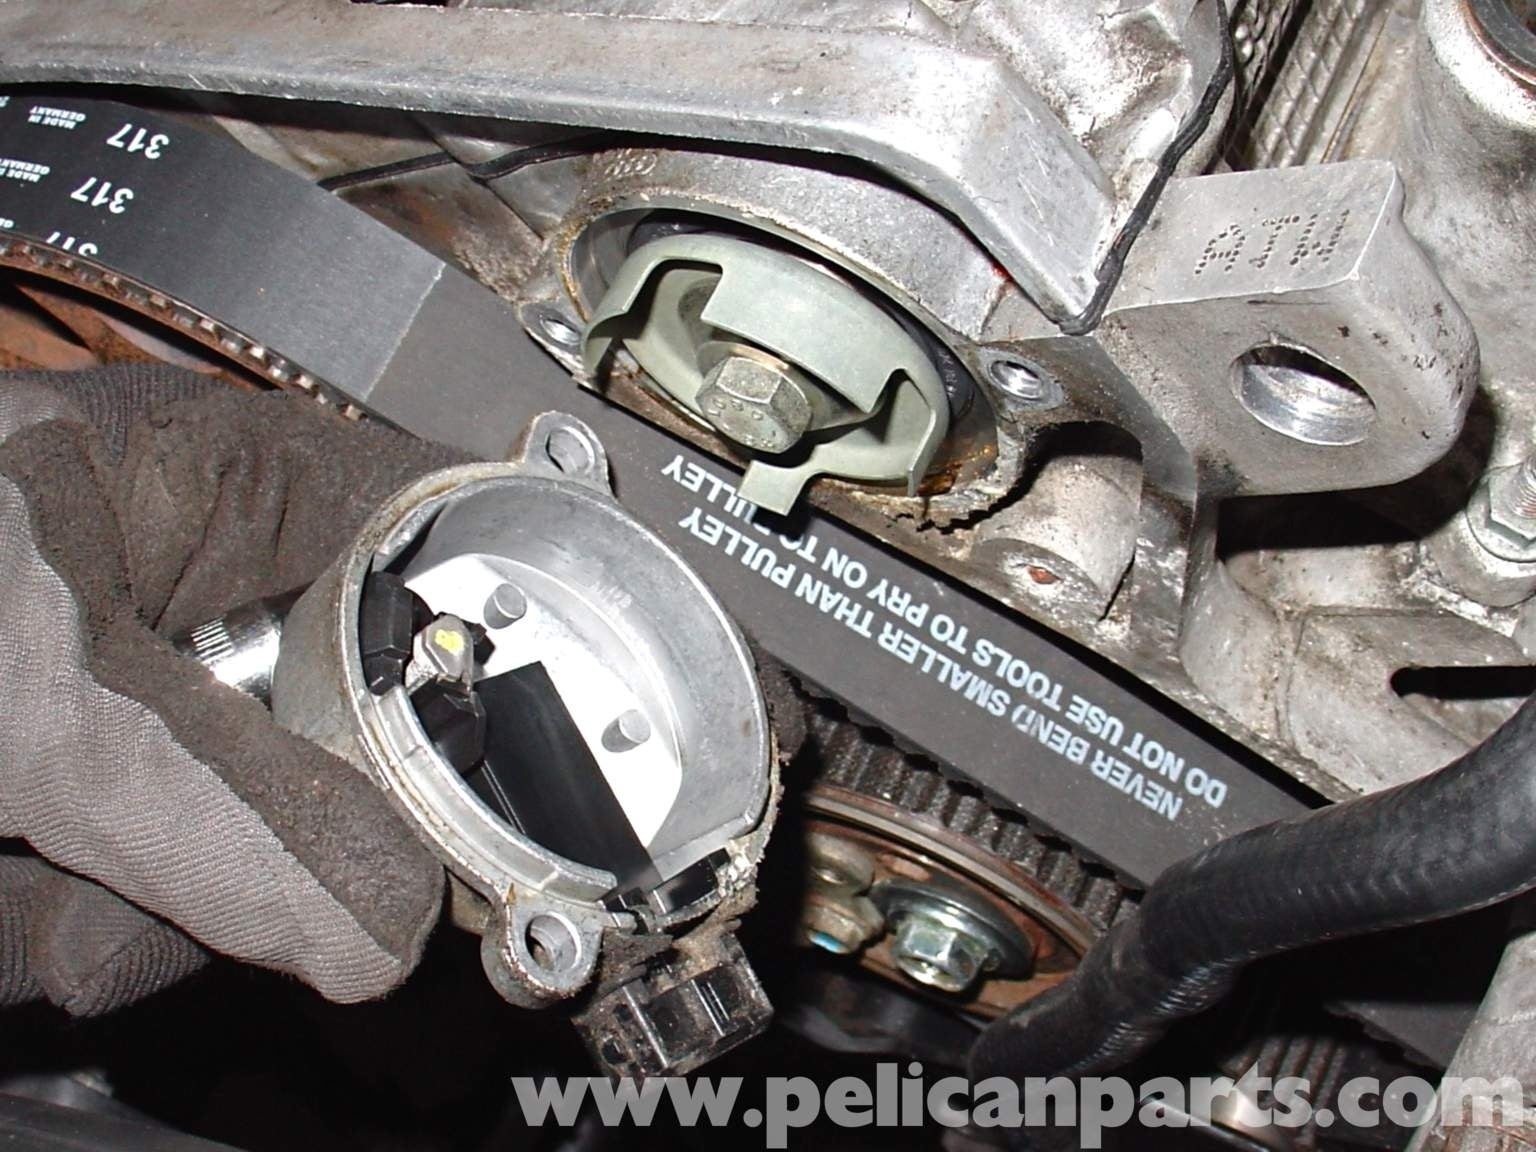 Audi A4 B6 - Check For These Issues Before Buying 